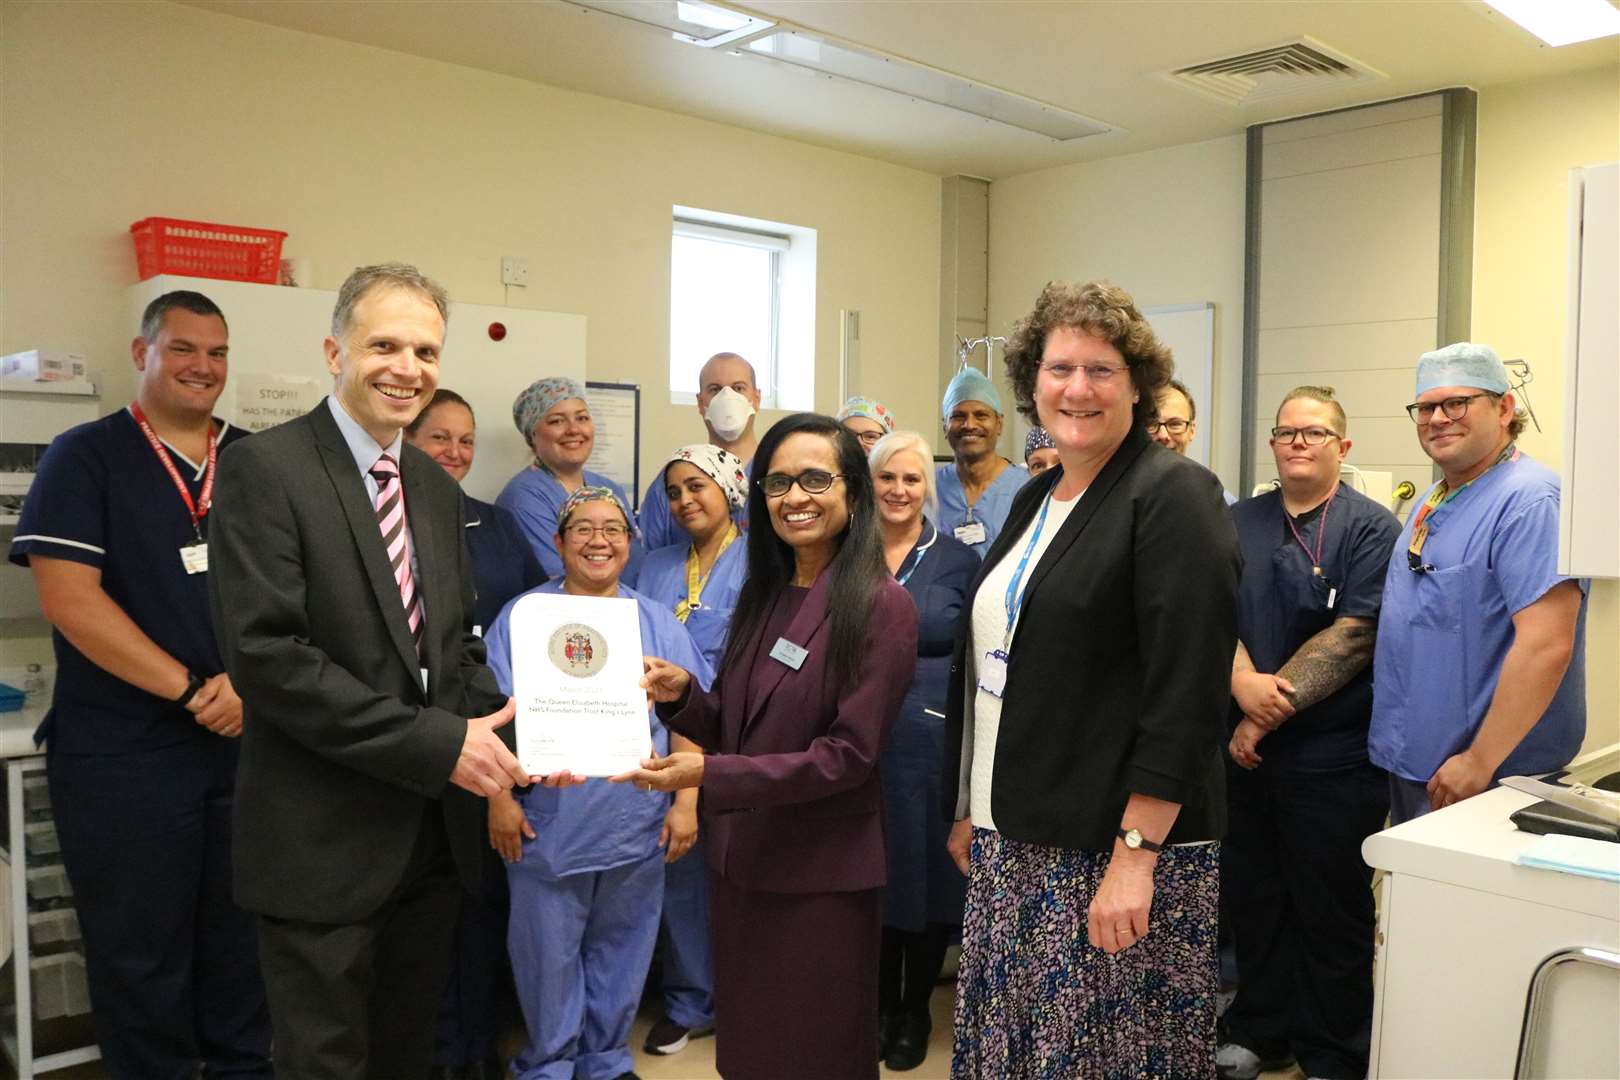 The QEH Anaesthetic Department is celebrating achieving accreditation from the Royal College of Anaesthetists. Credit: QEH.